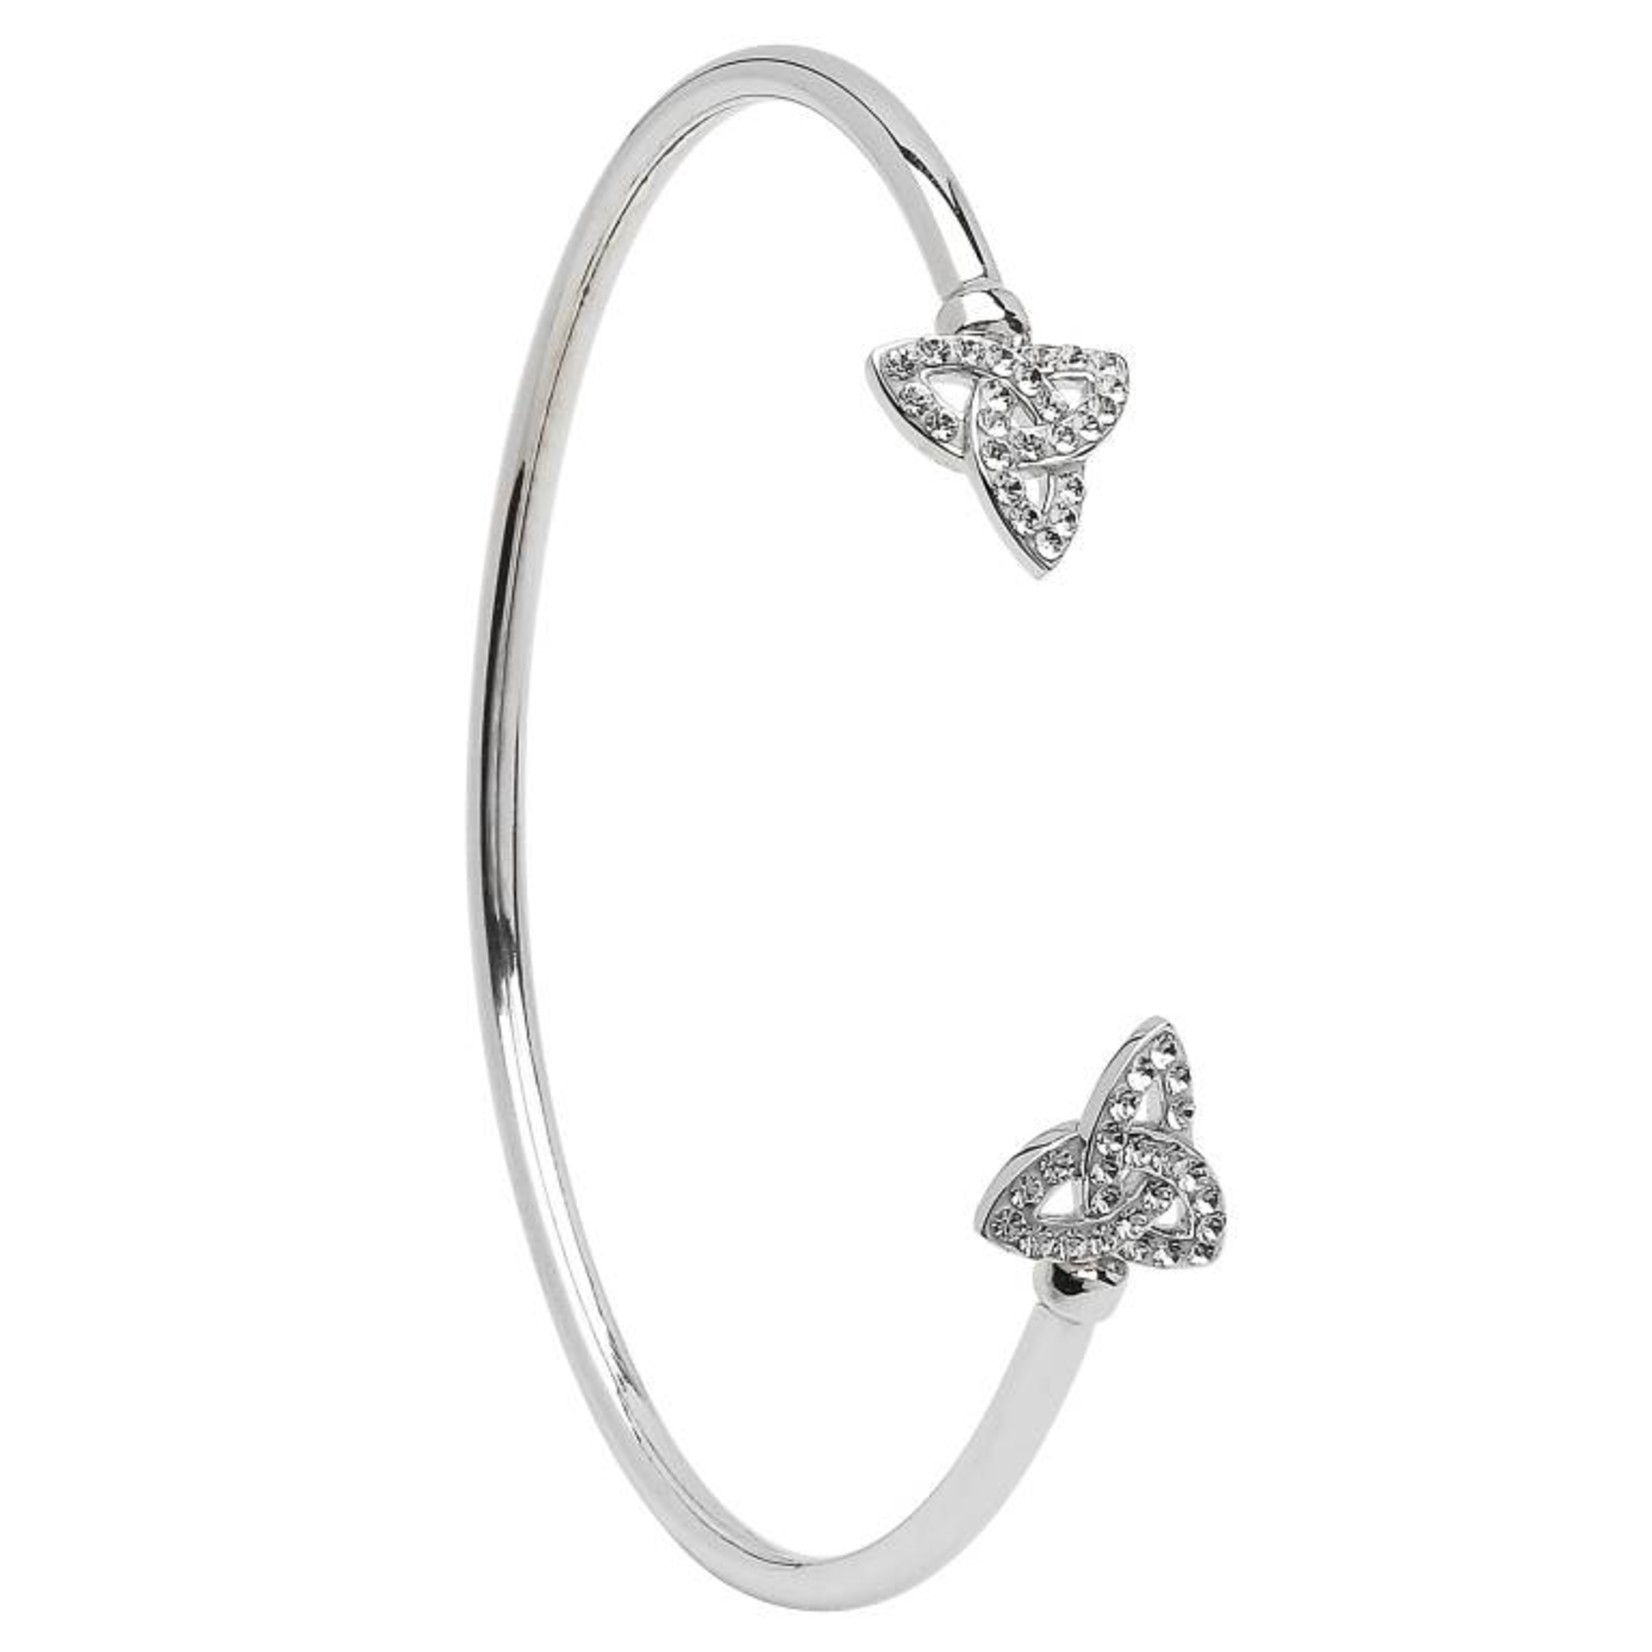 Shanore Sterling Silver Trinity Cuff Bangle